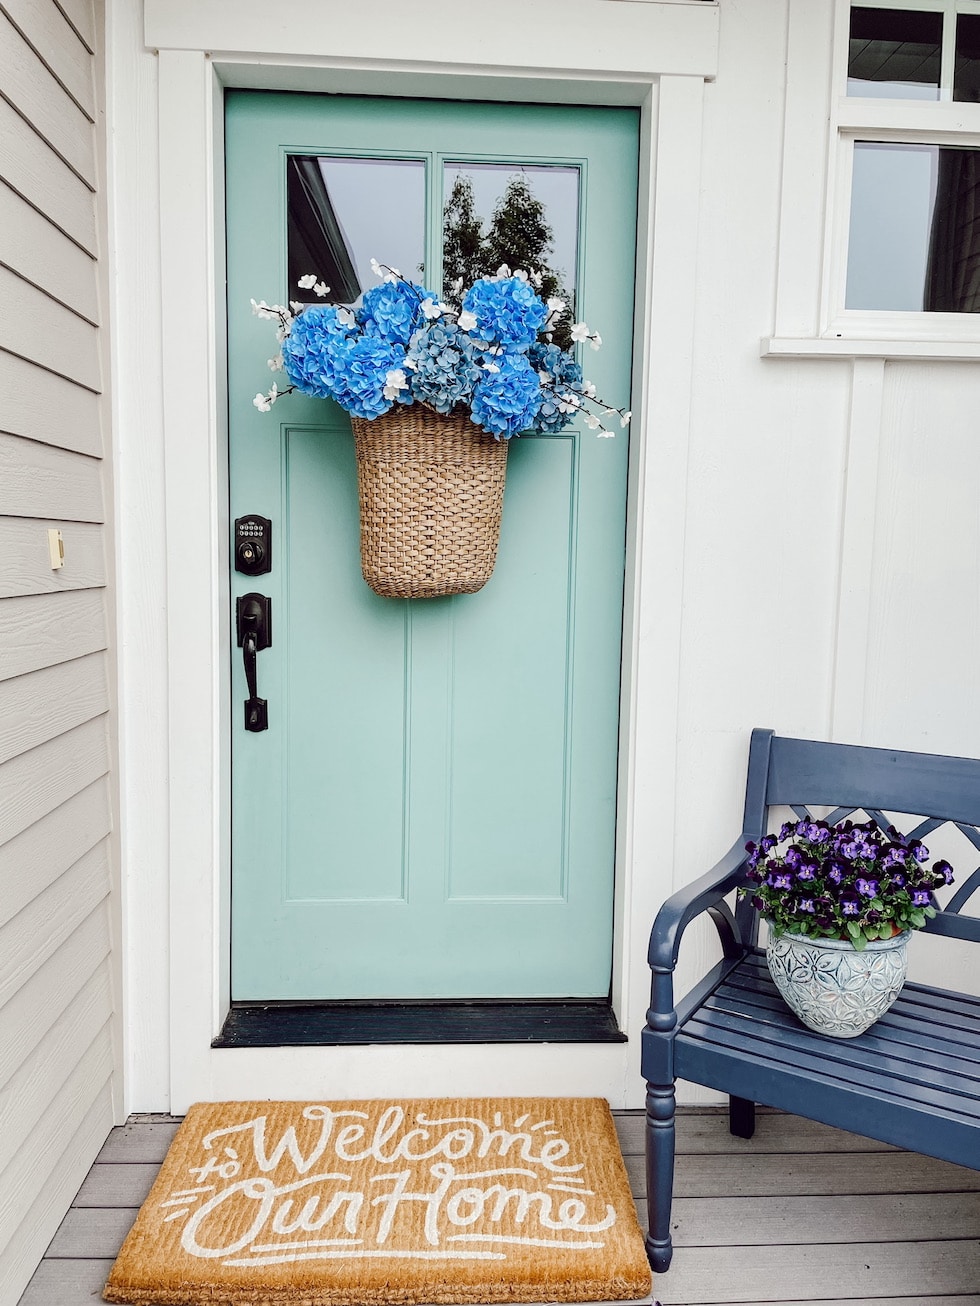 Summer Doormat Round Up (+ the Decor Accessory I Can't Stop Buying)